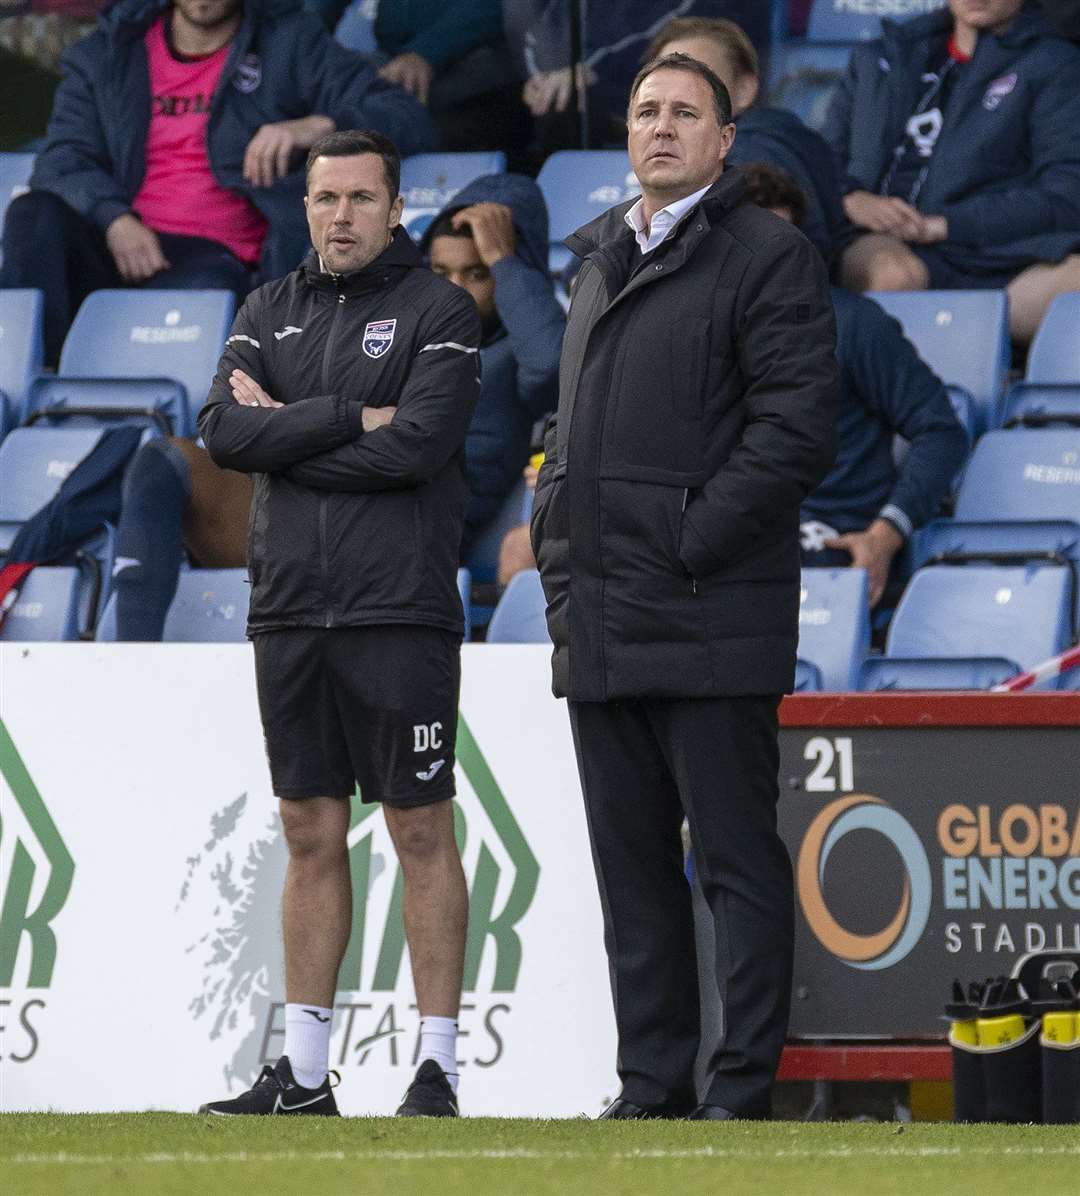 Picture - Ken Macpherson, Inverness. Ross County(2) v St.Mirren(3). 16.10.21. Ross County manager Malky Mackay and assistant manager Don Cowie.